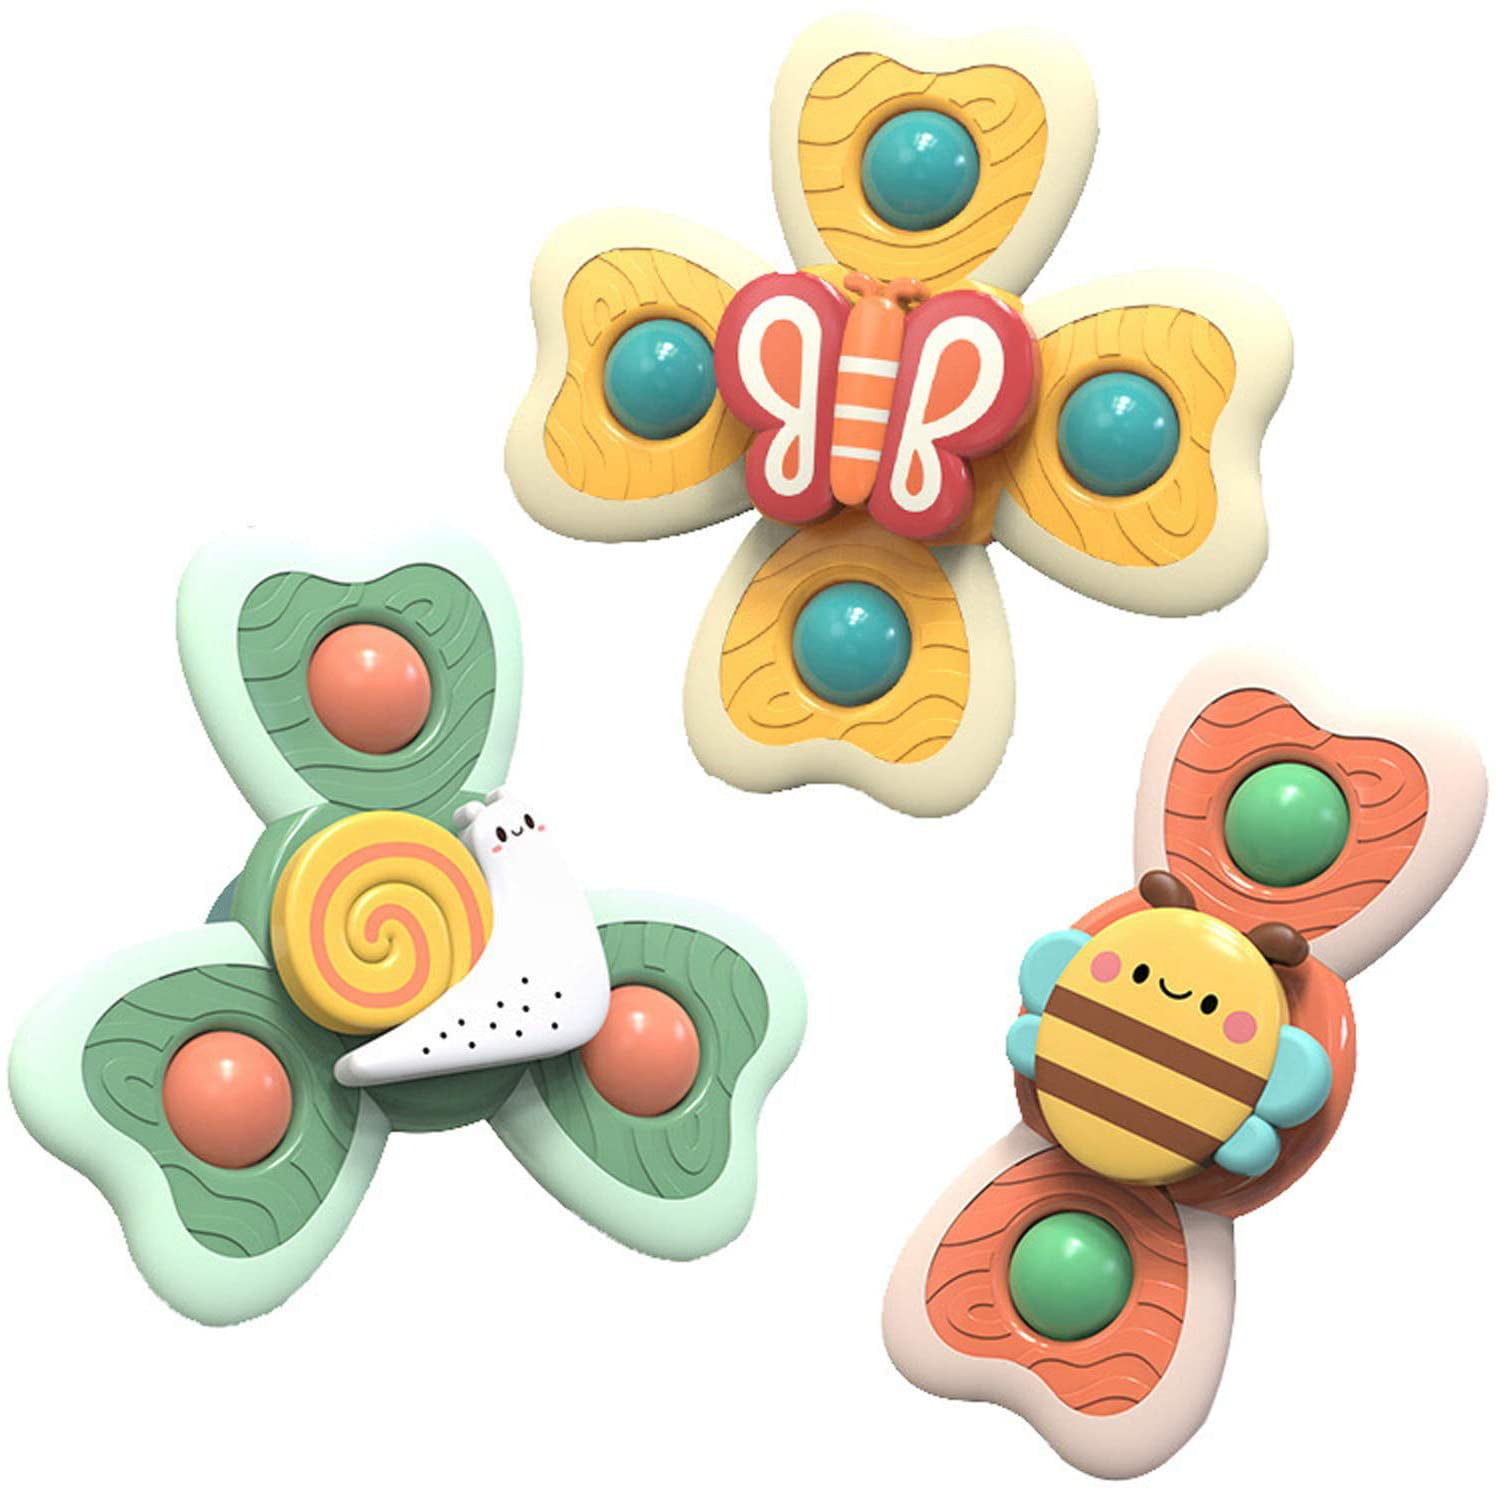 Spin Sucker Suction Cup Animal Bath Toys Turntable Spinning Windmill Stress Relief Frisbee Toy Table Sucker Early Learner Baby Child Spinning Top Toy 3Pcs-Bee Ladybug Butterfly 